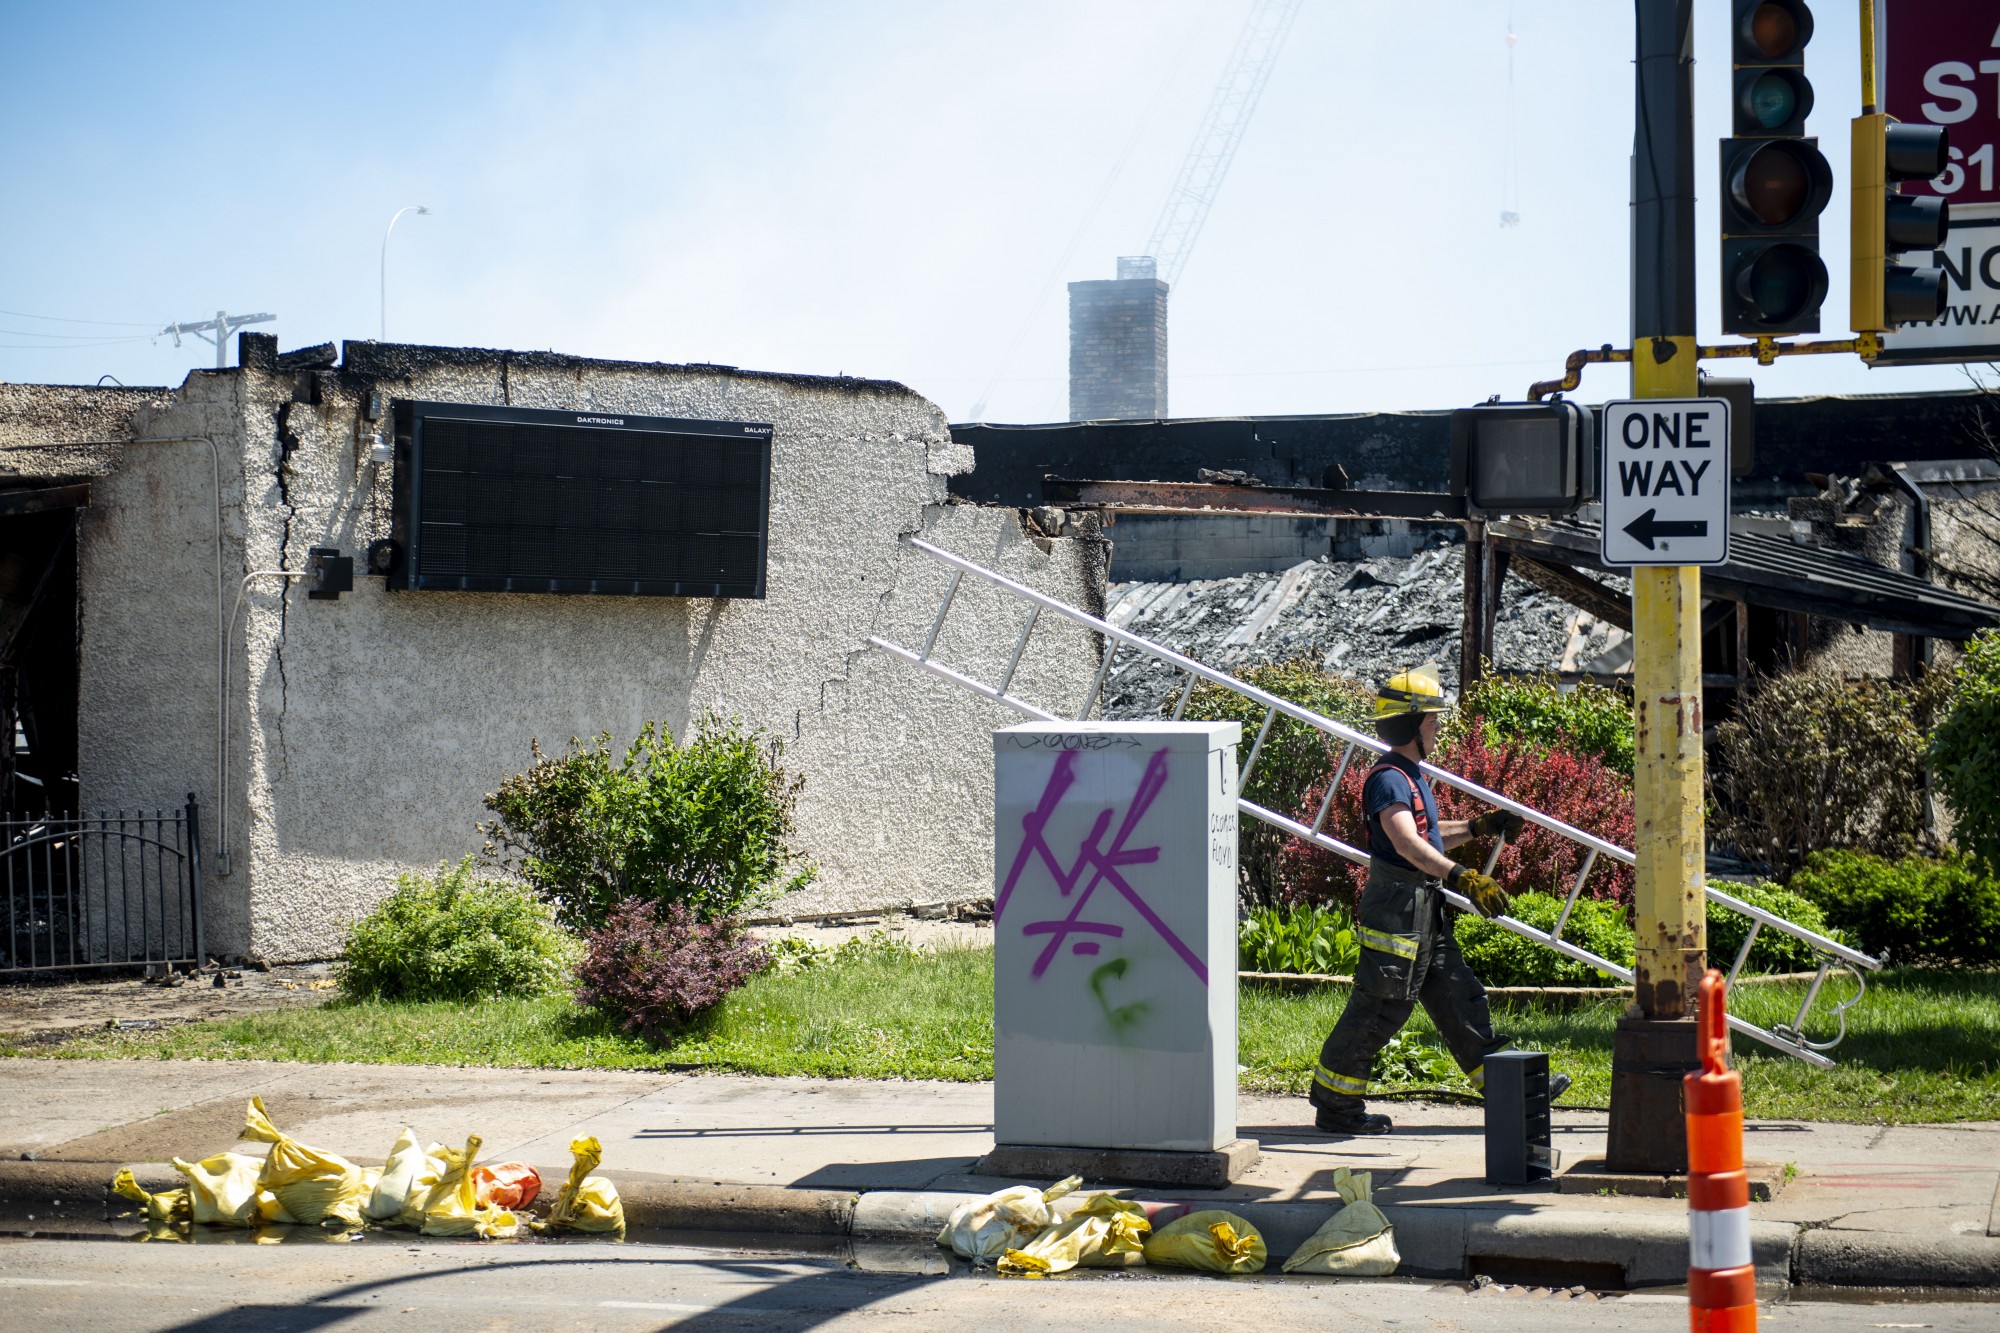 A firefighter carries a ladder near the Minneapolis 5th Police Precinct following another night of riots on Saturday, May 30.